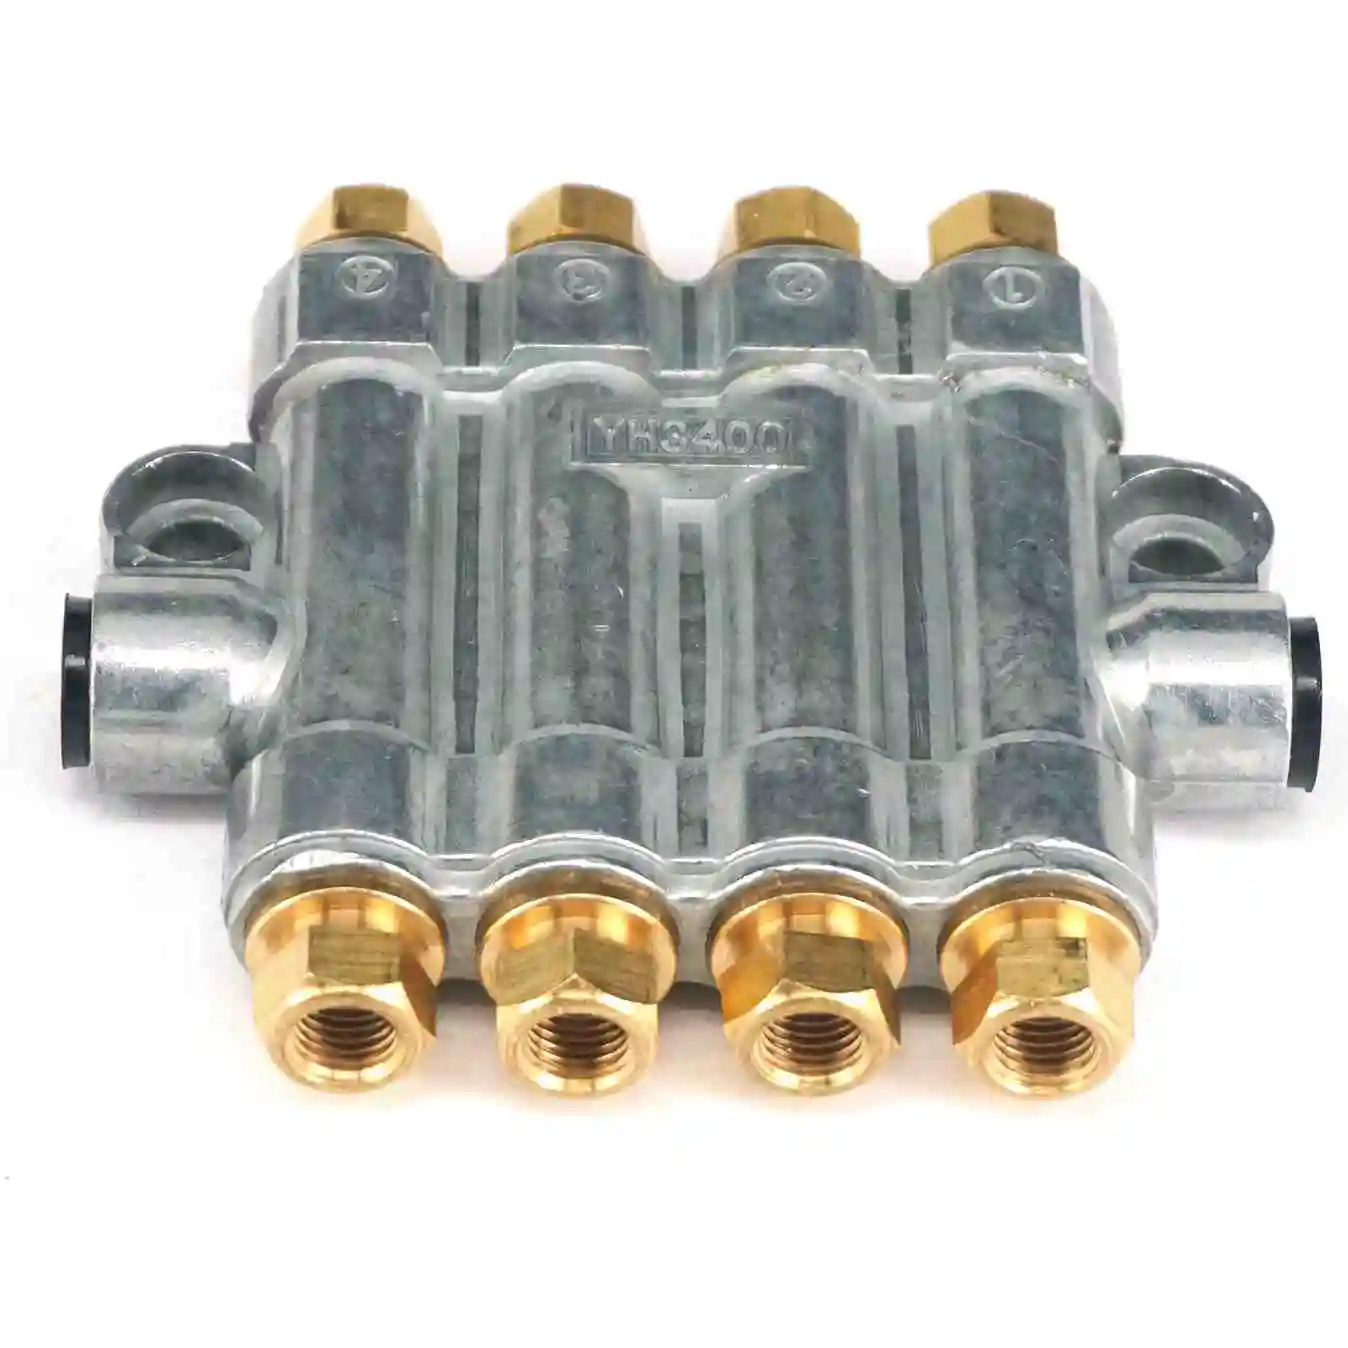 In M8x1 Out M10x1 4 Ways Aluminum/Brass Lube Oil Piston Distributor Value Manifold Block for centralized lubrication system